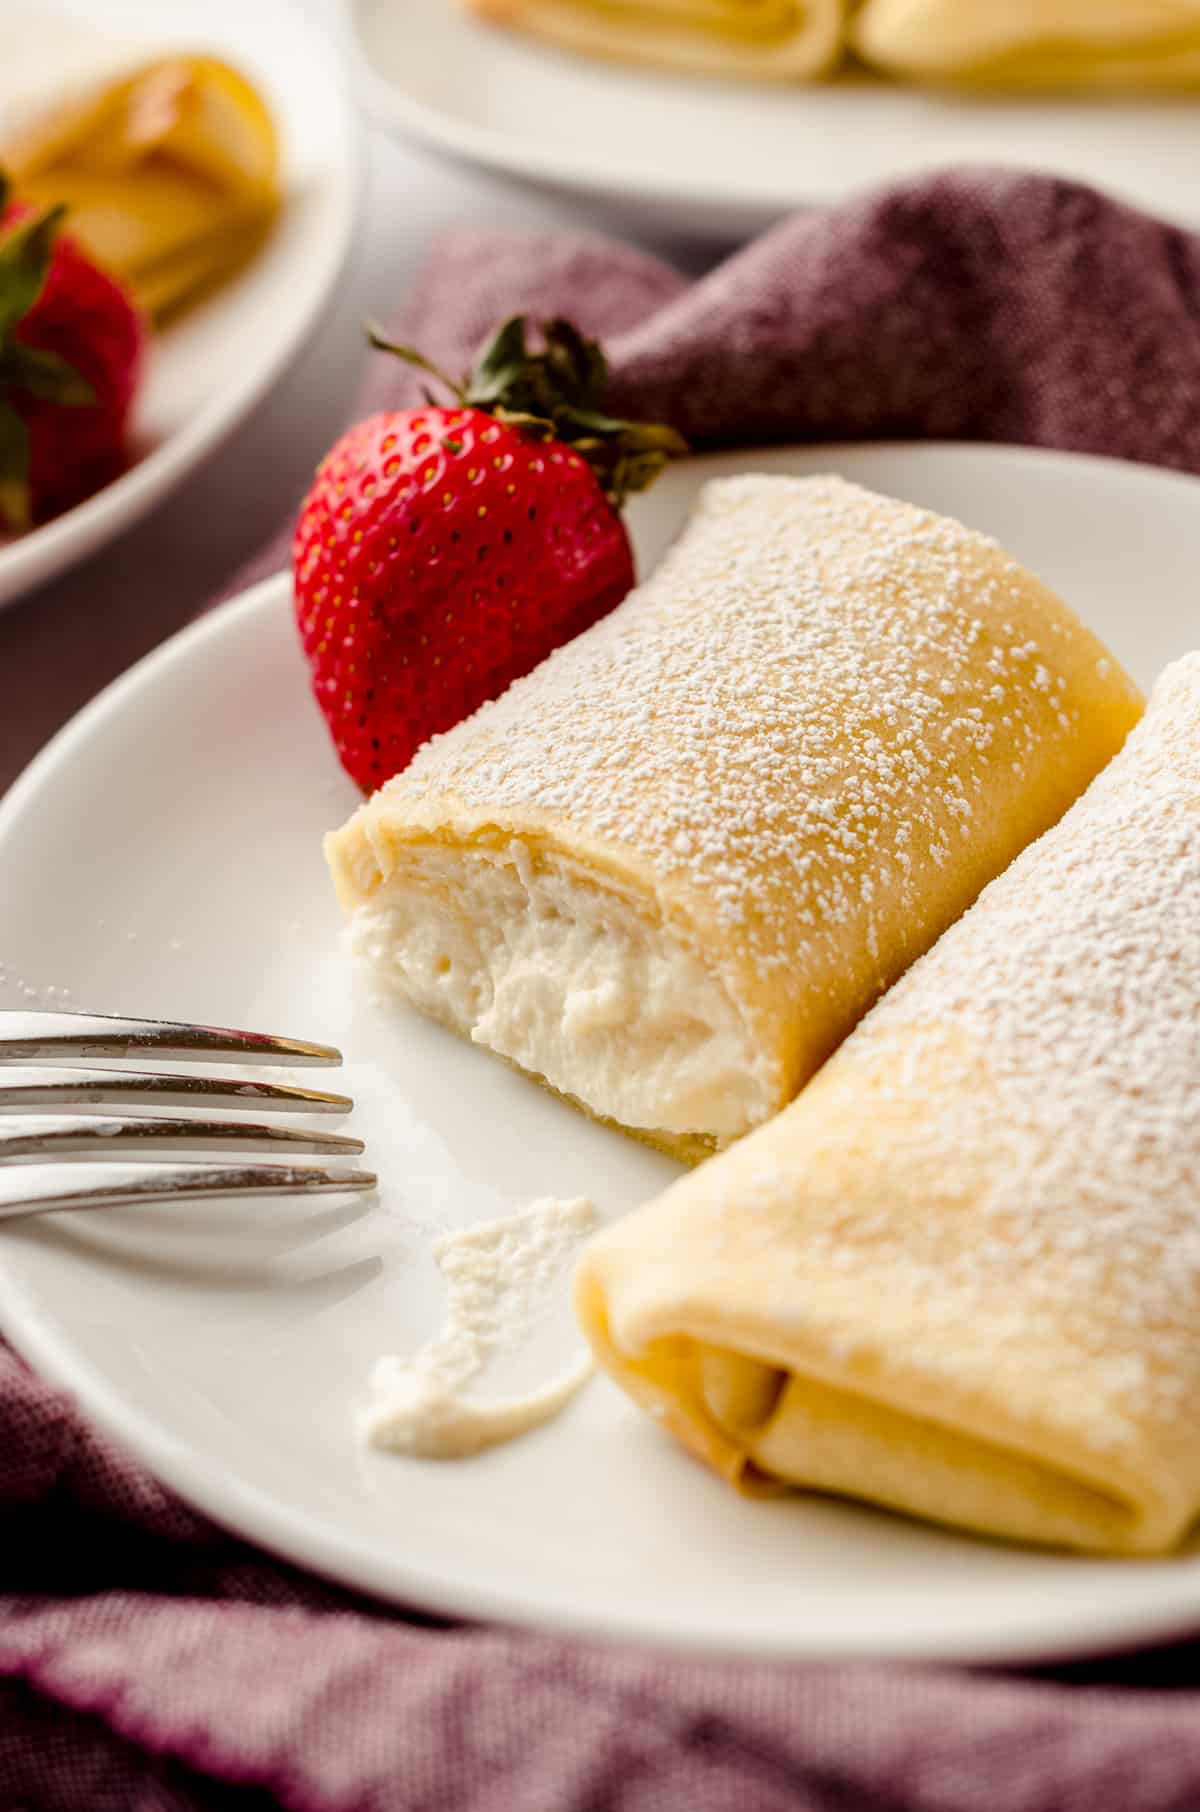 A close up of a rolled crepe with ricotta filling.